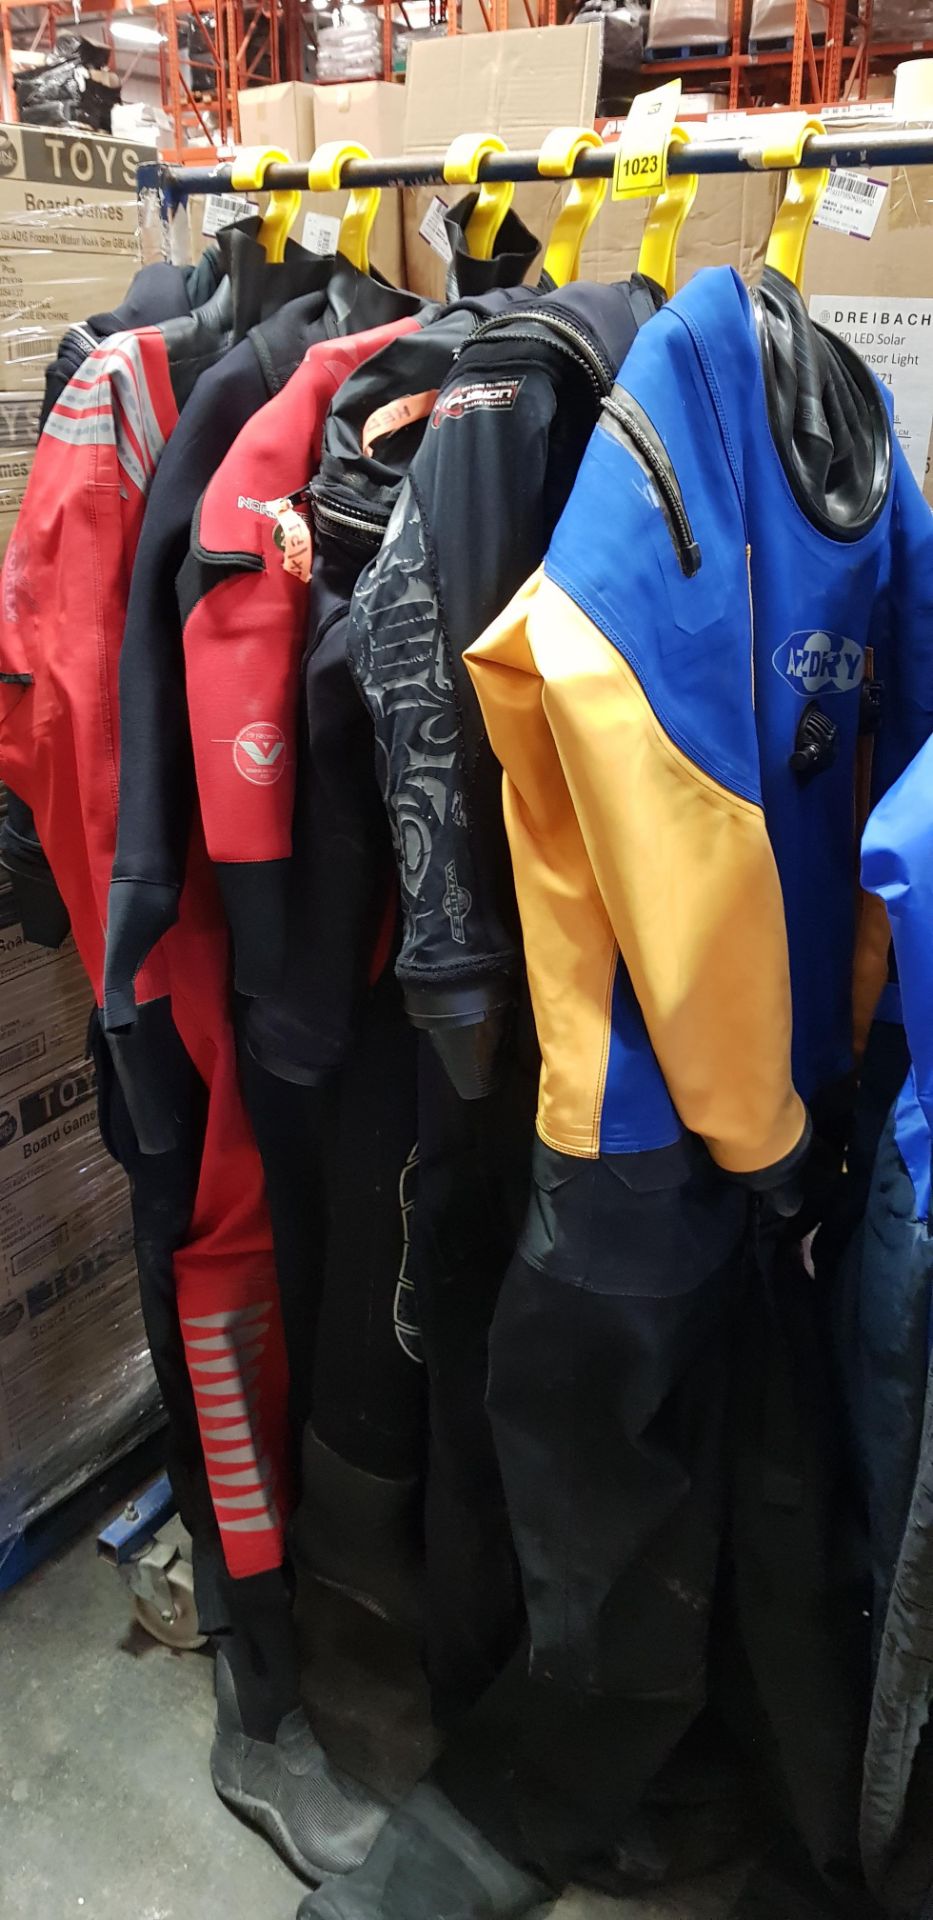 7 X SCUBA DIVING DRY SUITS I.E AZ DRY, VOYAGER AND SEA SKIN IN VARIOUS SIZS (EX-HIRE)